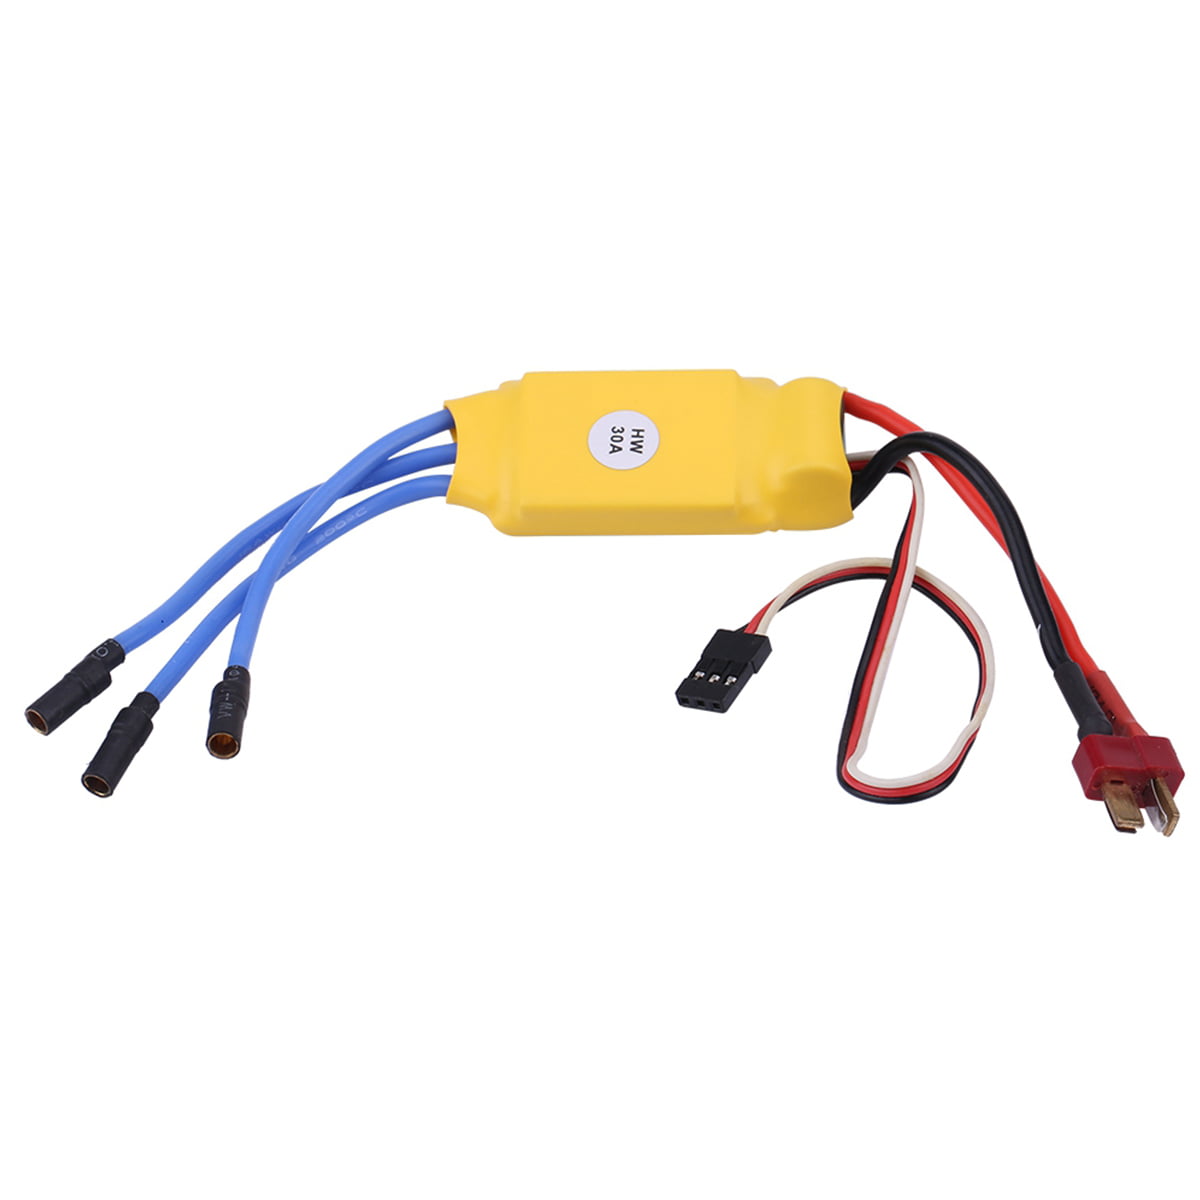 Details about   30A Brushless Electronic Speed Controller ESC For RC Airplane Quadcopter Motor 